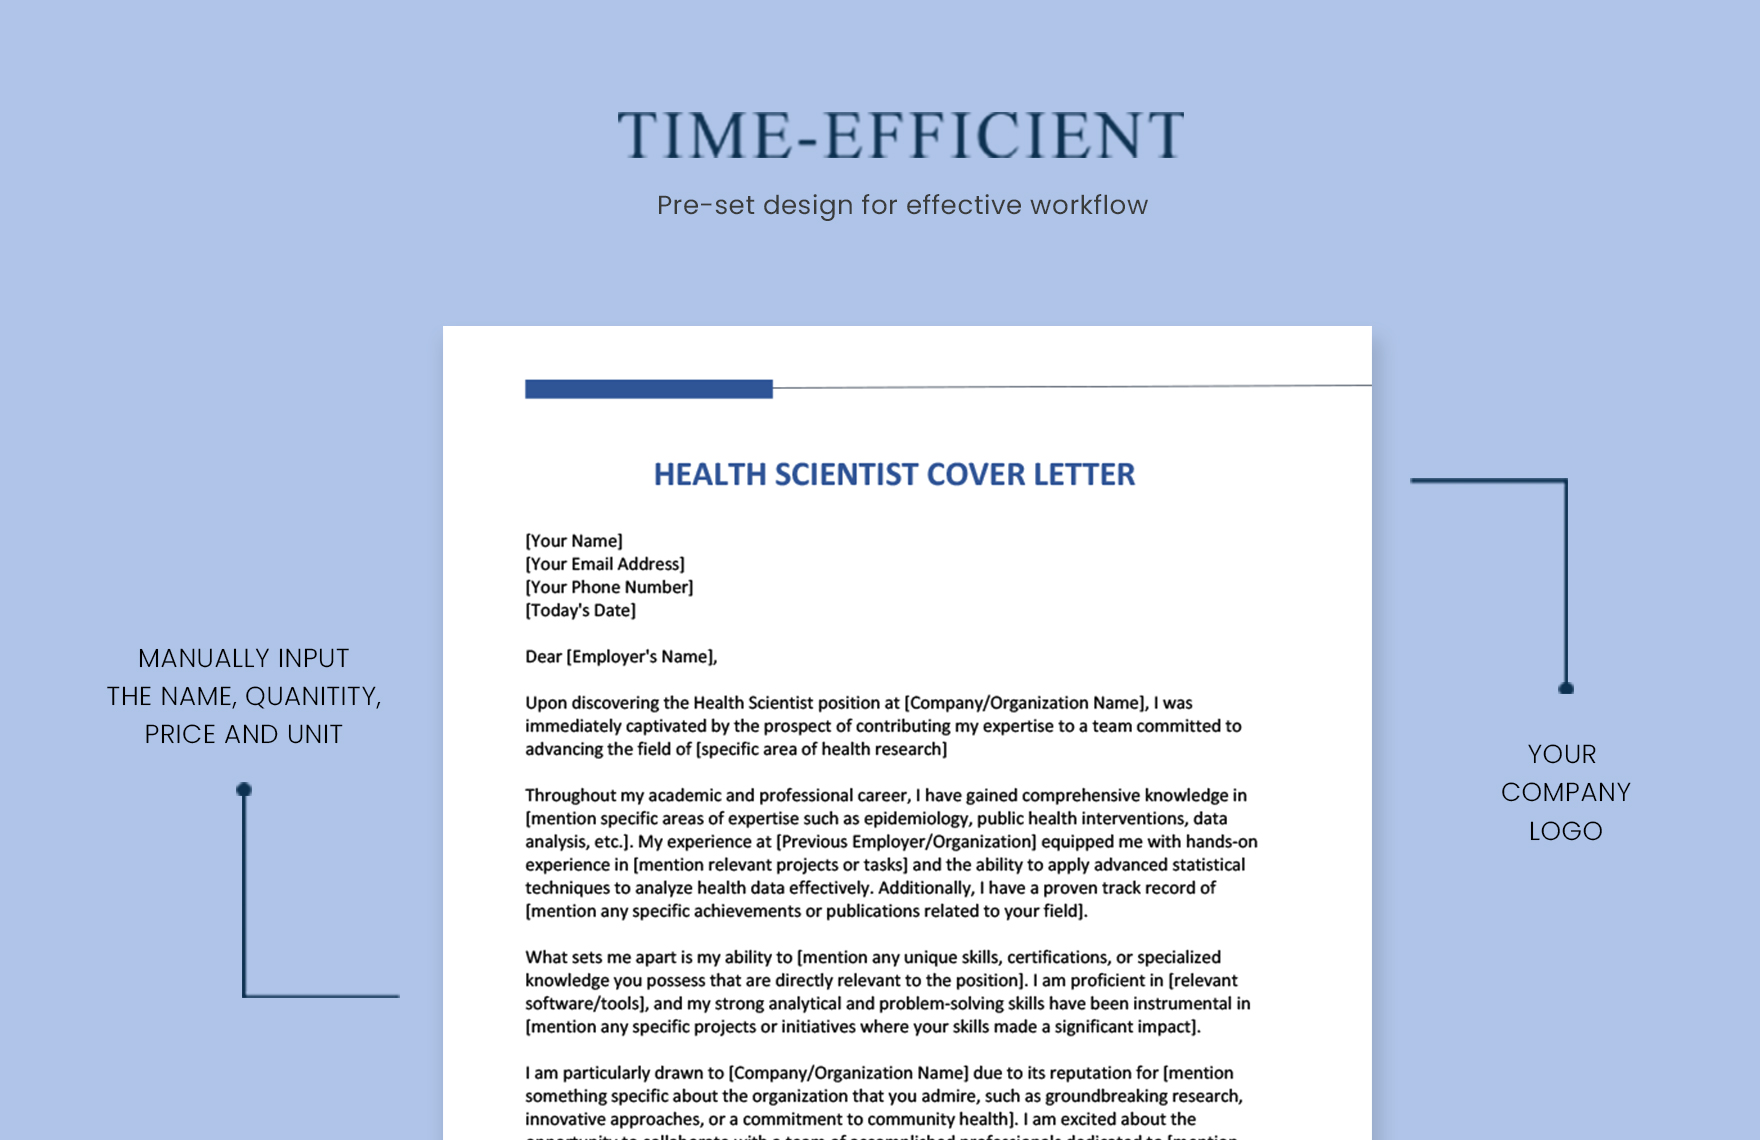 Health Scientist Cover Letter